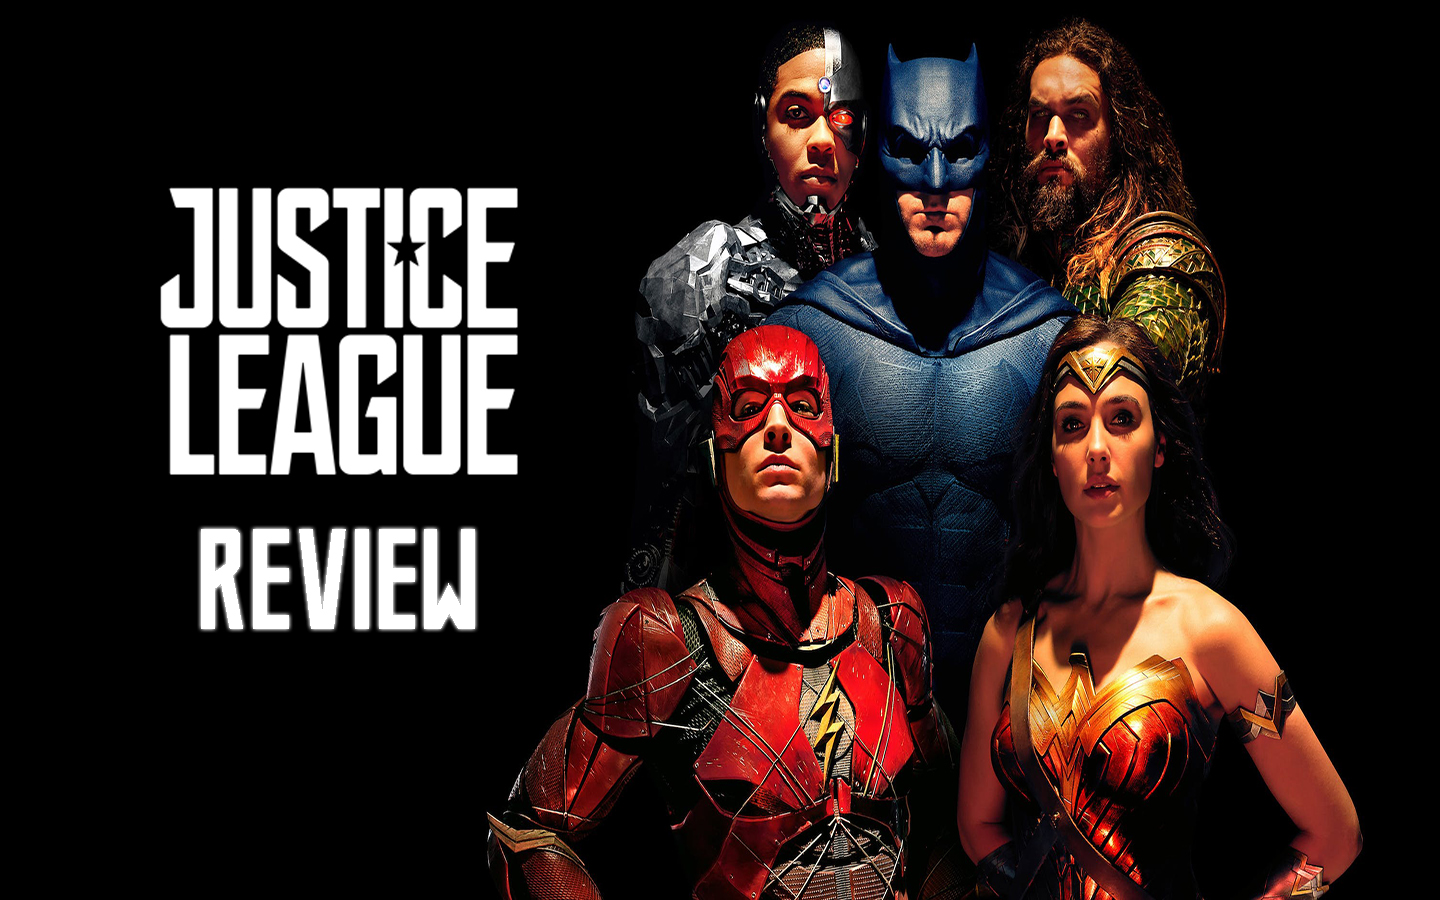 ‘Justice League’ Is A Decent Ride With DC’s Iconic Heroes, But Suffers From Obvious Flaws – Review